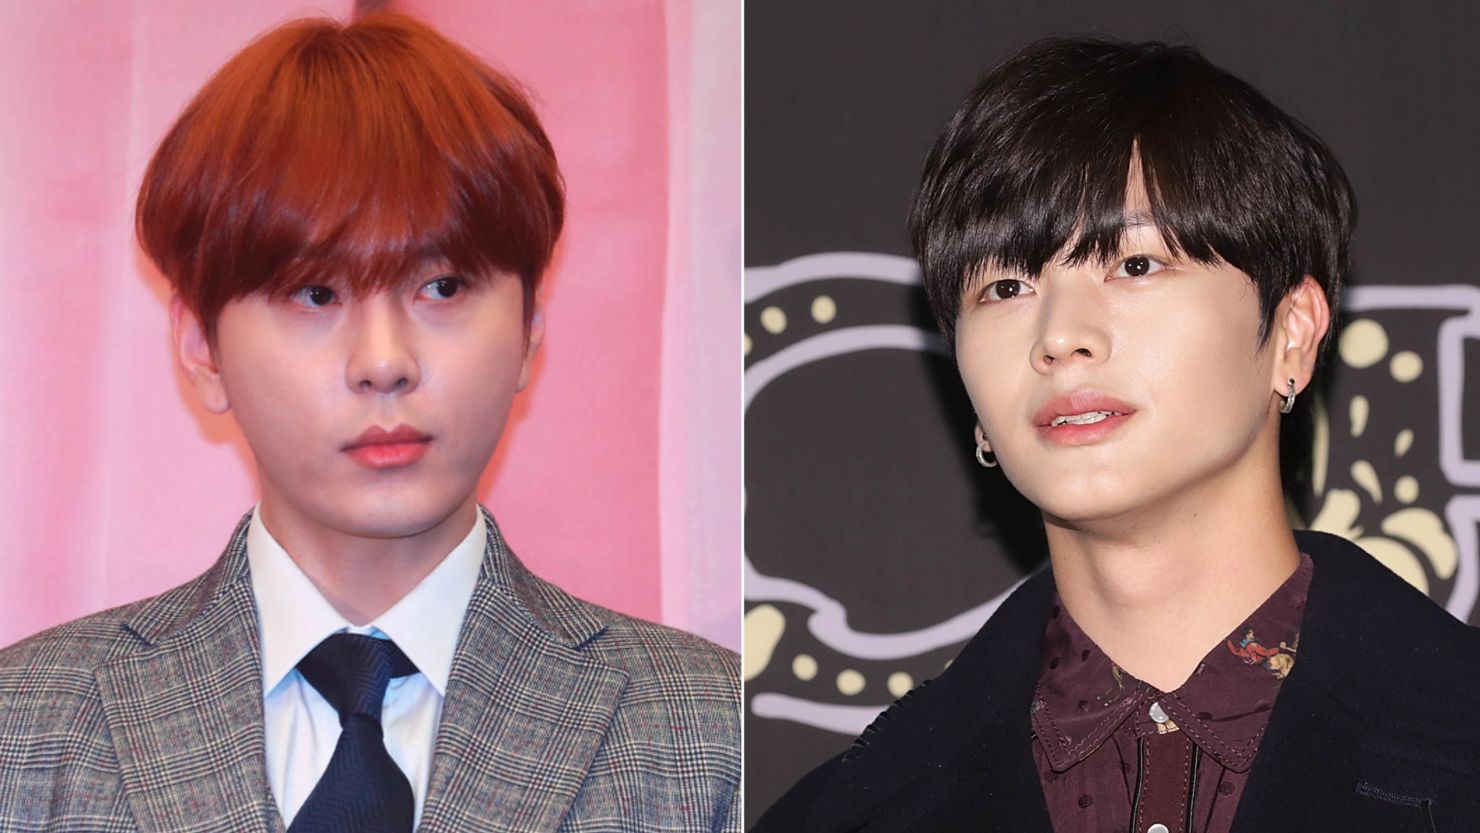 Yong Jun-hyung (left) of Highlight and Yook Sung-Jae (right) of BtoB were among those affected.